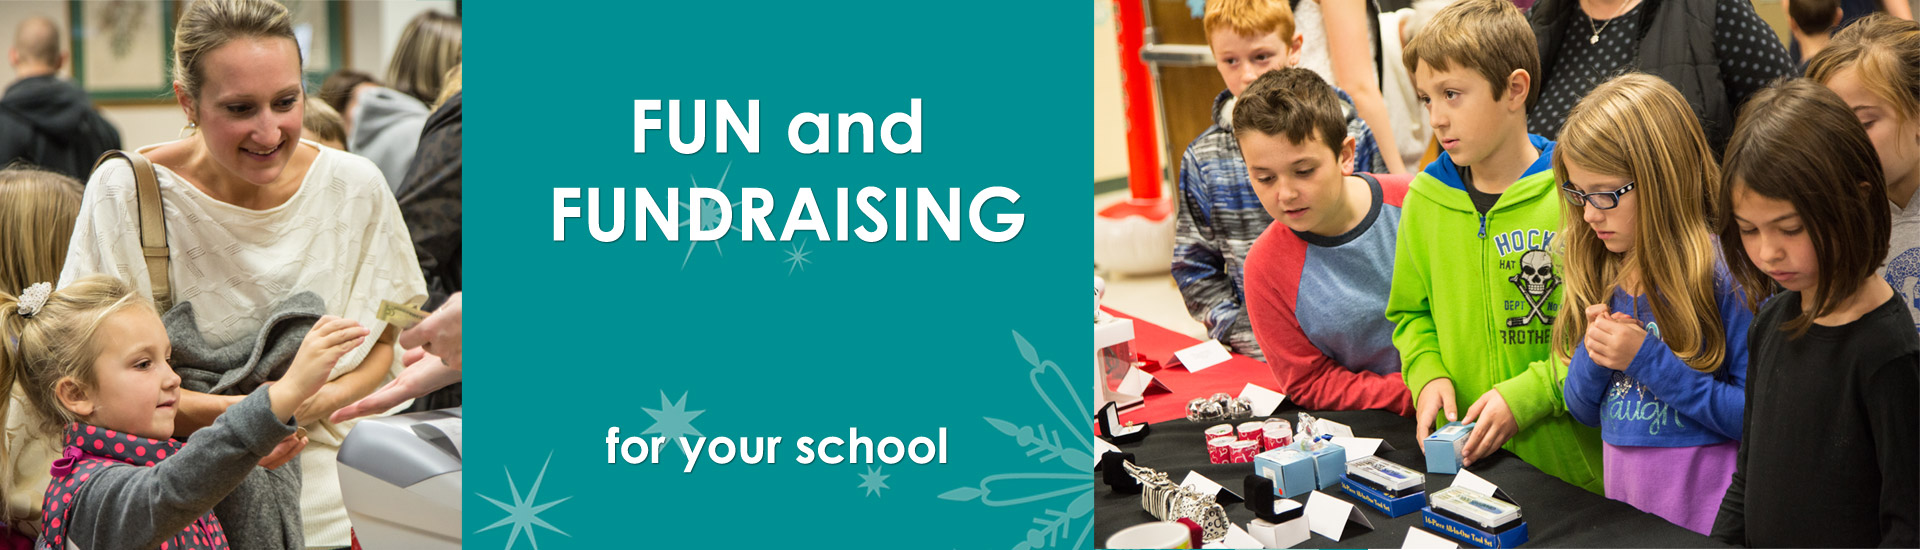 Fun and Fundraising School Holiday Shop